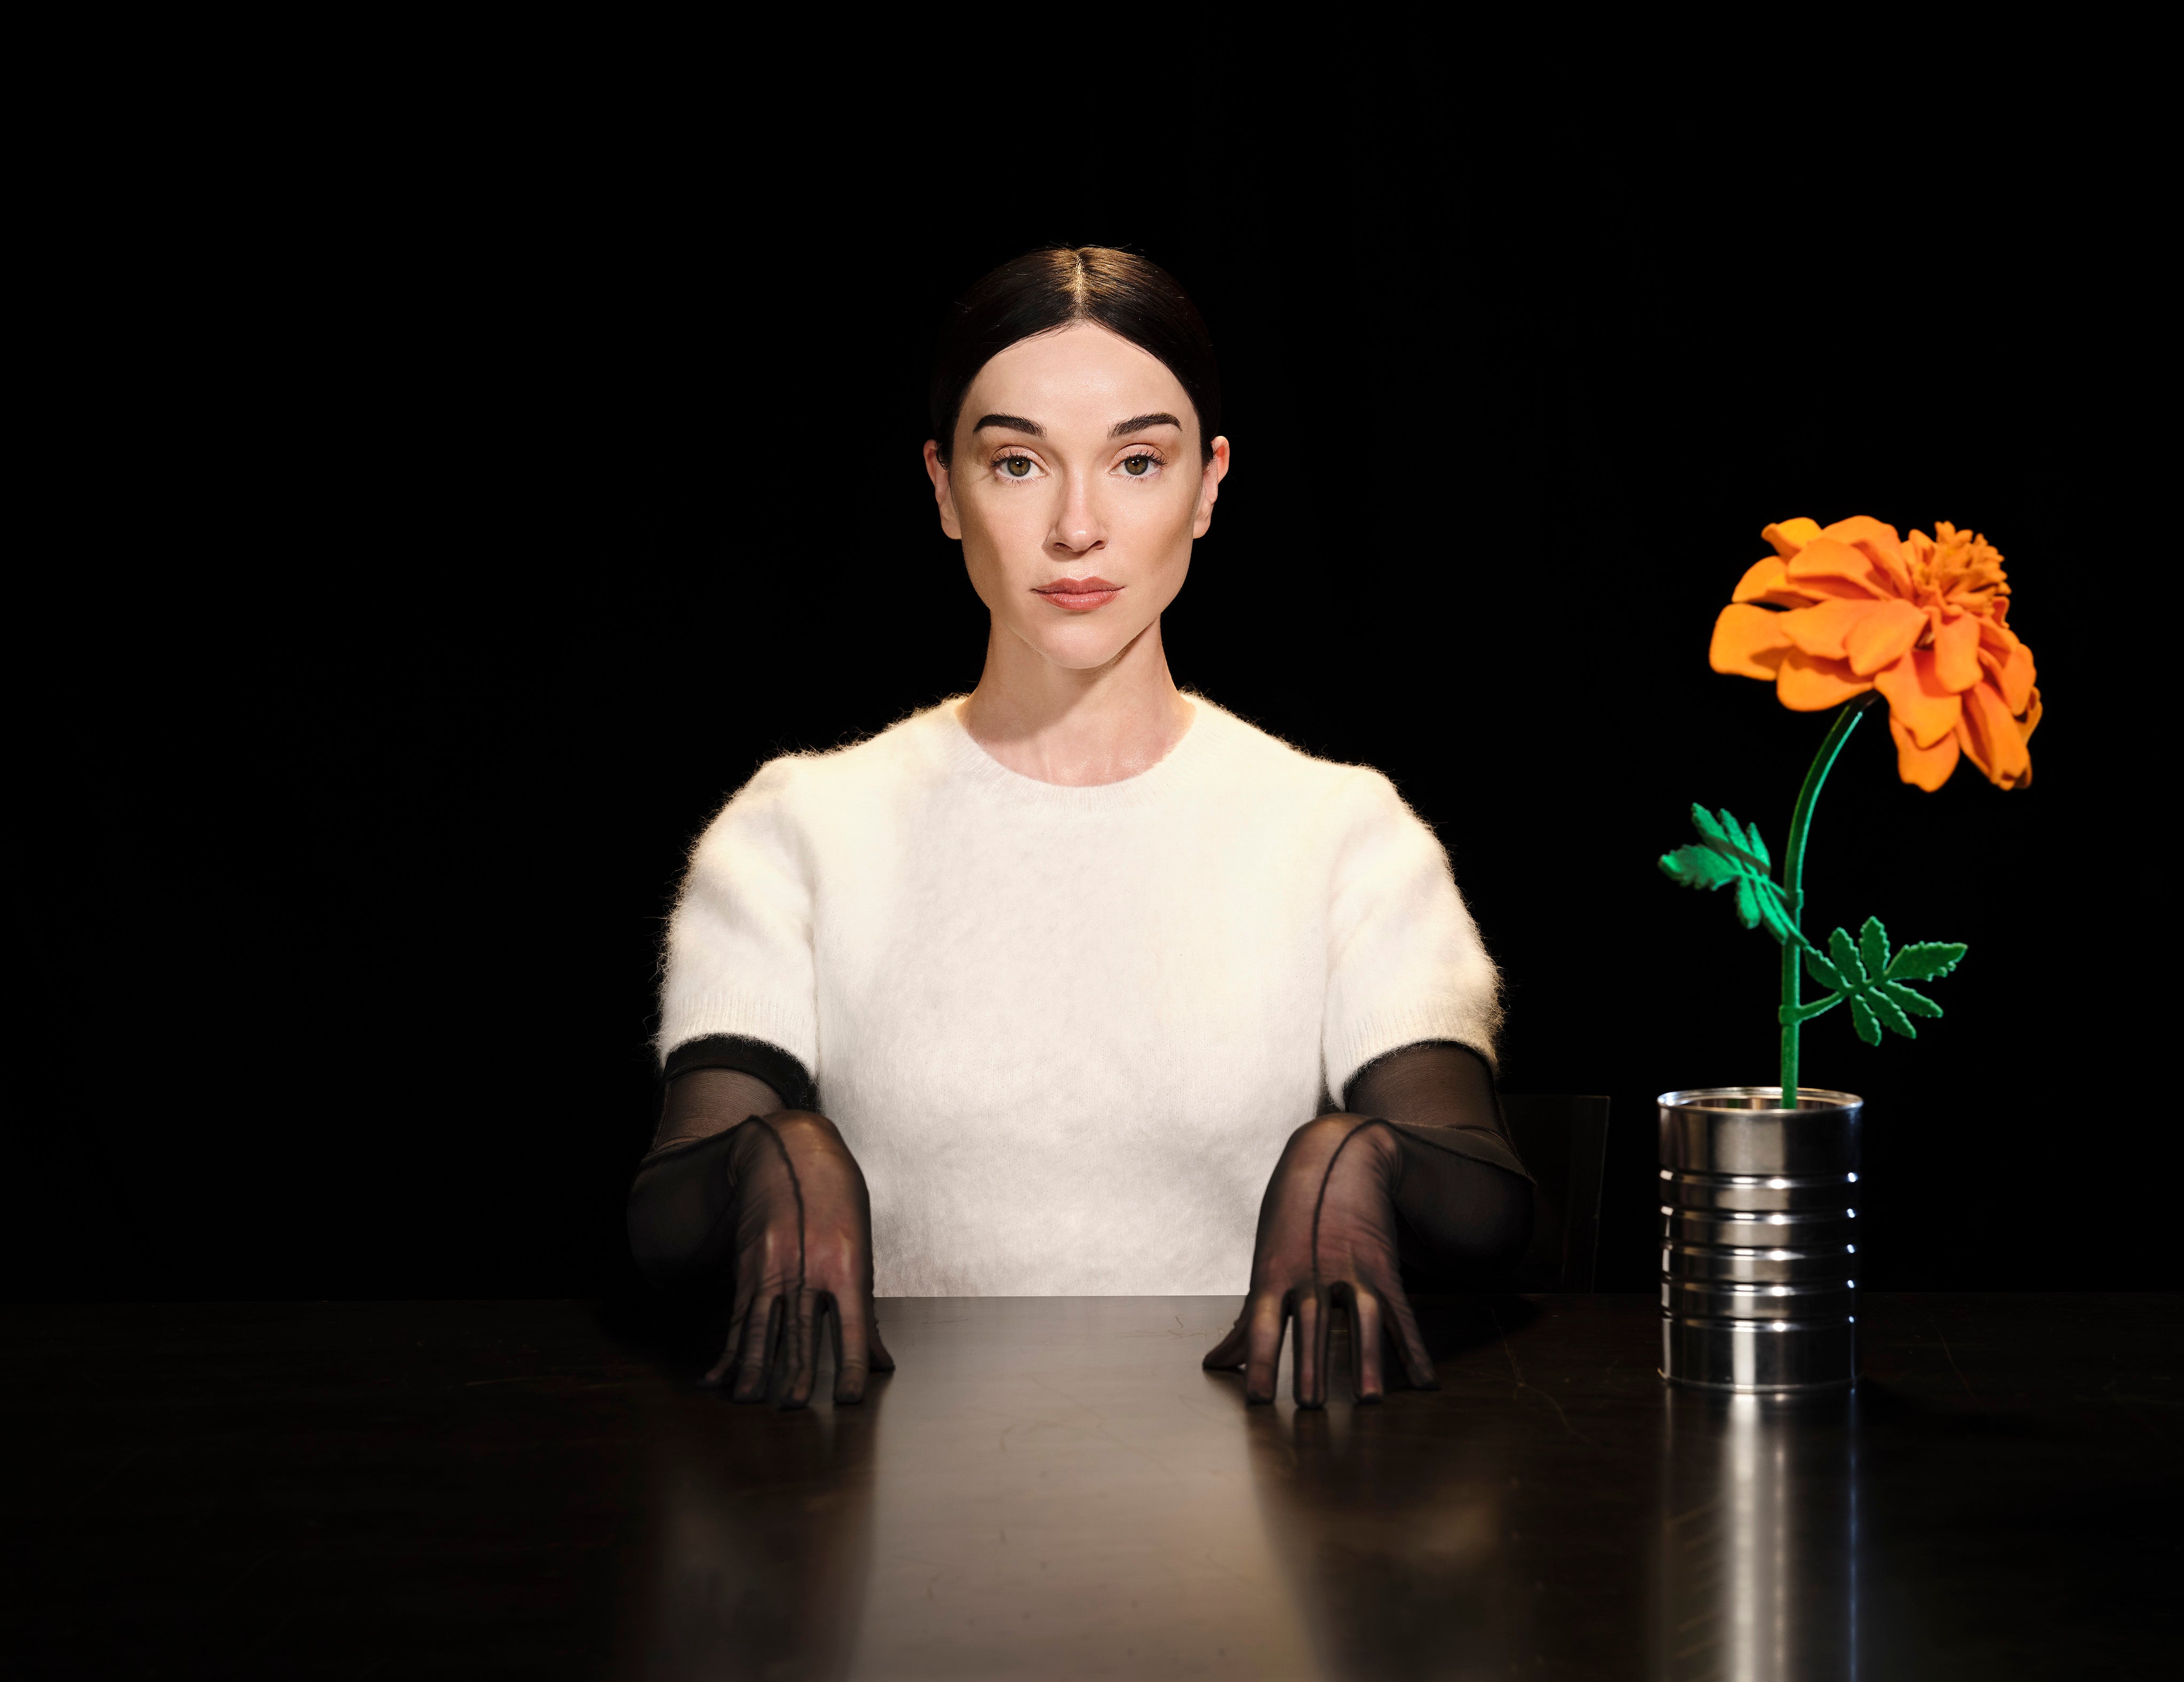 St. Vincent in London promo photo for Priority from O2 presale offer code